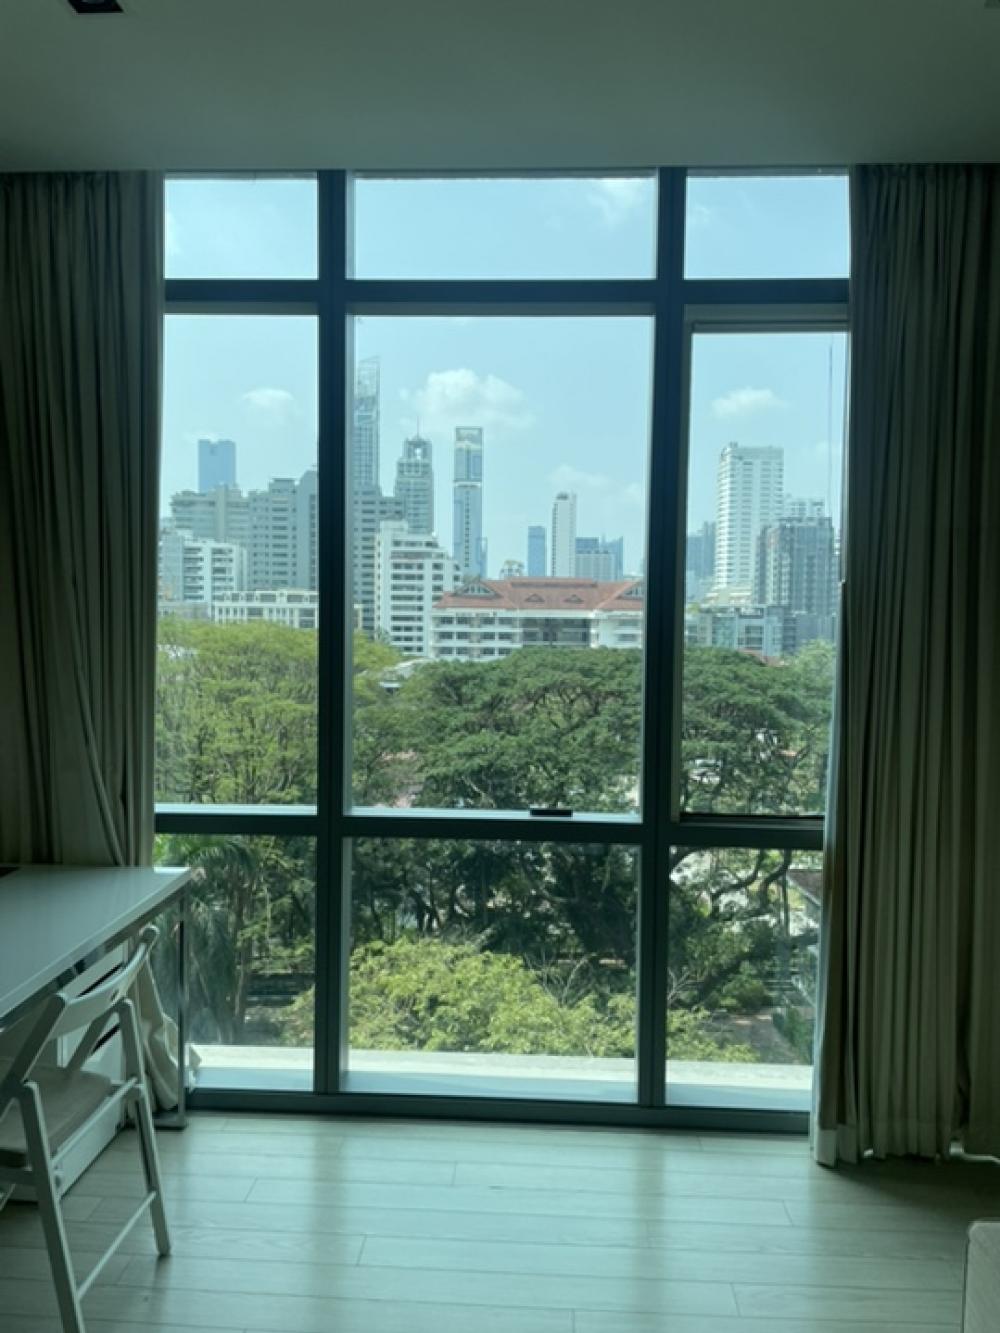 For SaleCondoSukhumvit, Asoke, Thonglor : Urgent sale, Watthana Park view, The Room Sukhumvit 21 project, beautiful room 37 sq m, fully furnished, selling below market. For more information, please call Beer 089-8578865